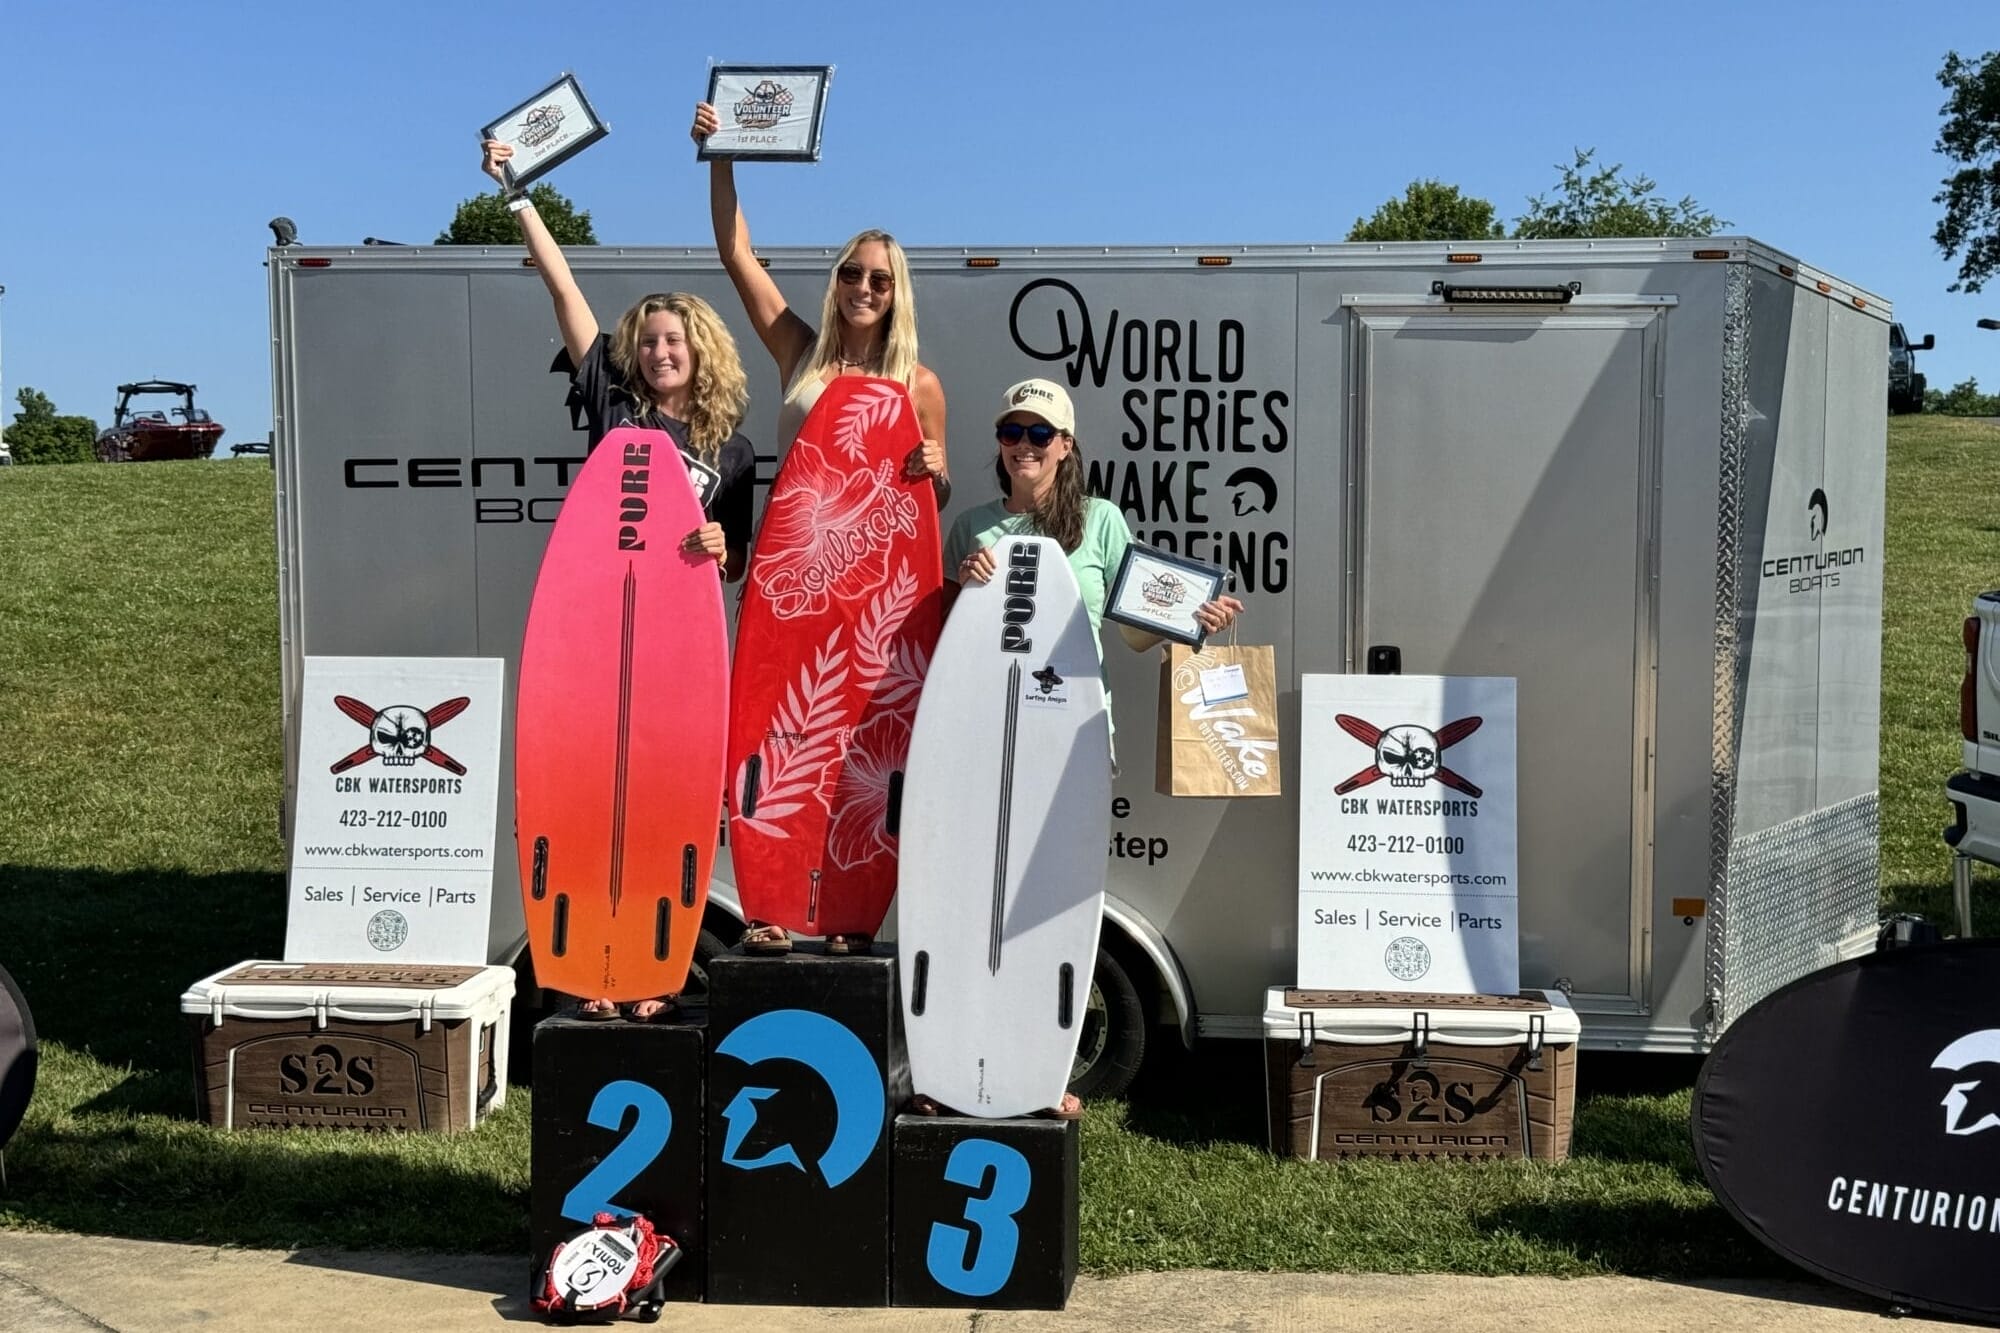 Three individuals stand on a winners podium holding certificates, with two holding surfboards. They are in front of a trailer with 